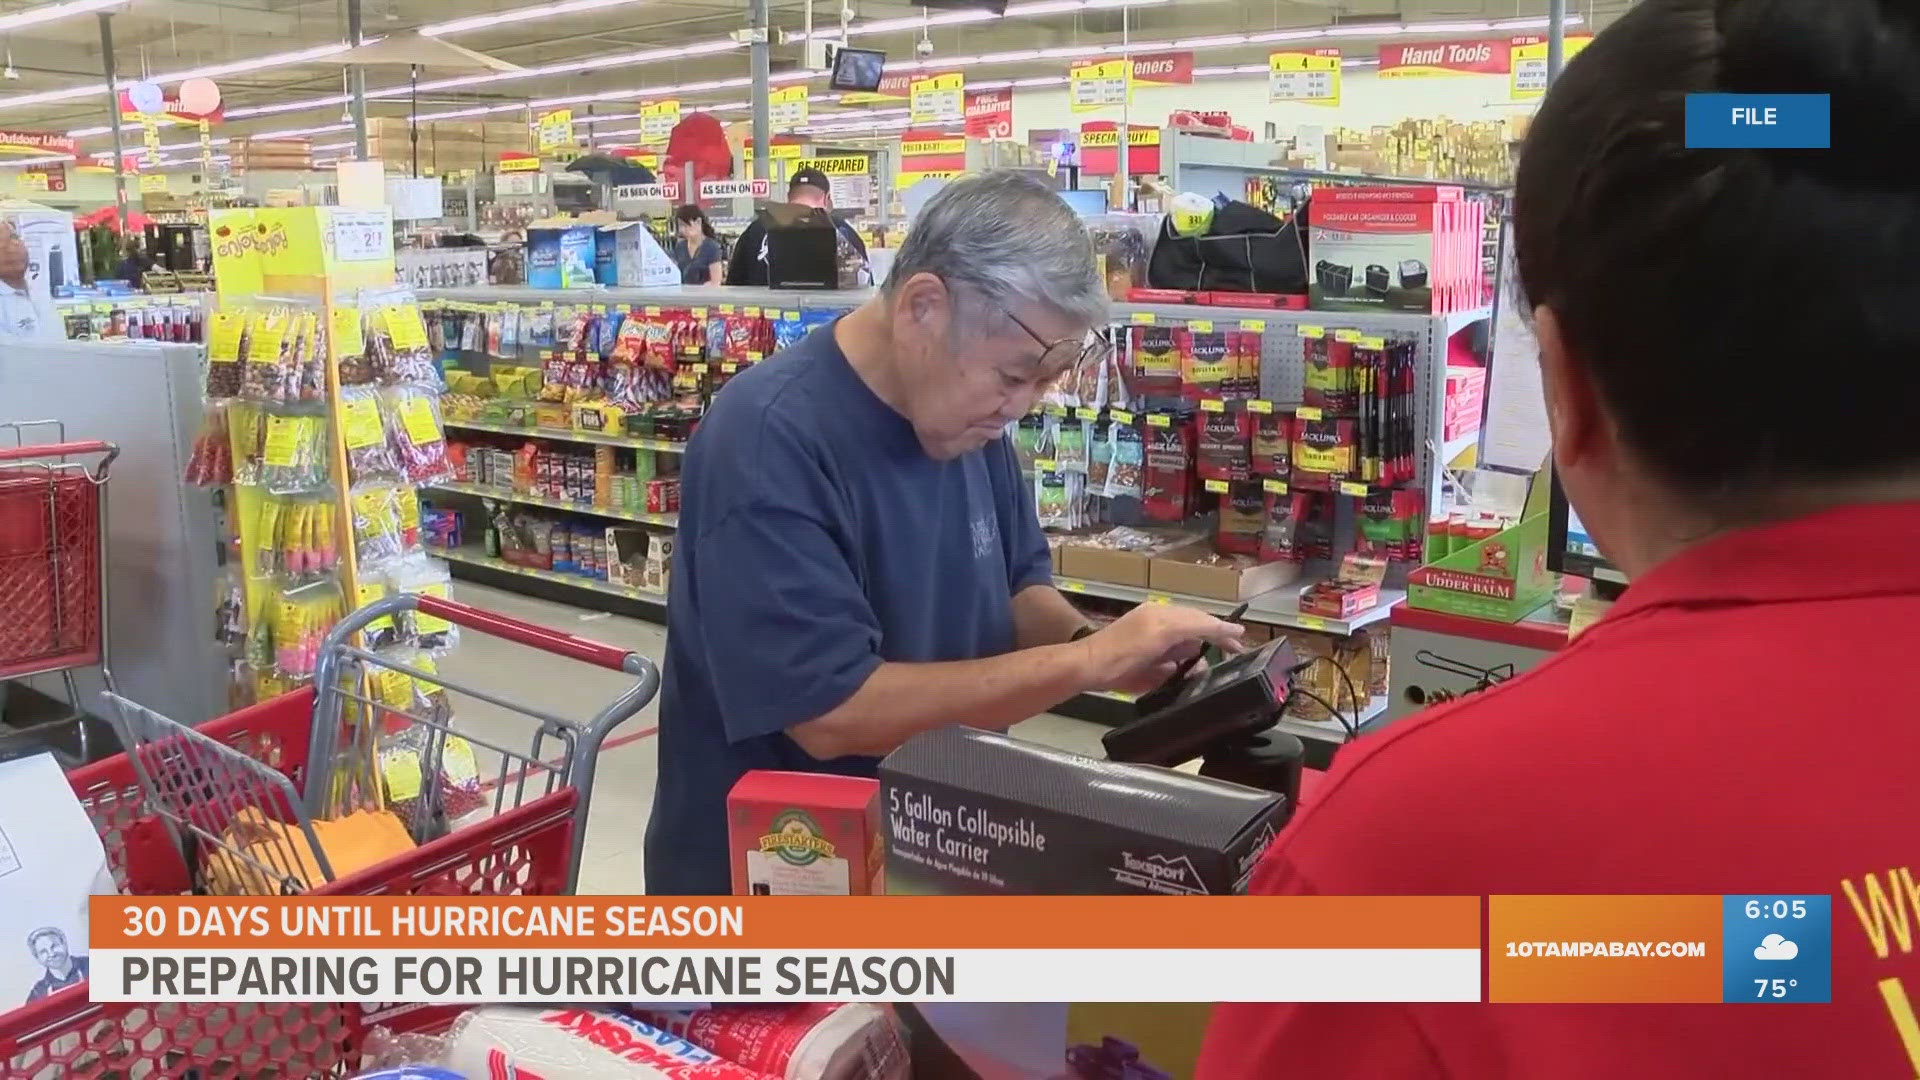 Hurricane season is only 30 days away. Here are tips to be prepared.